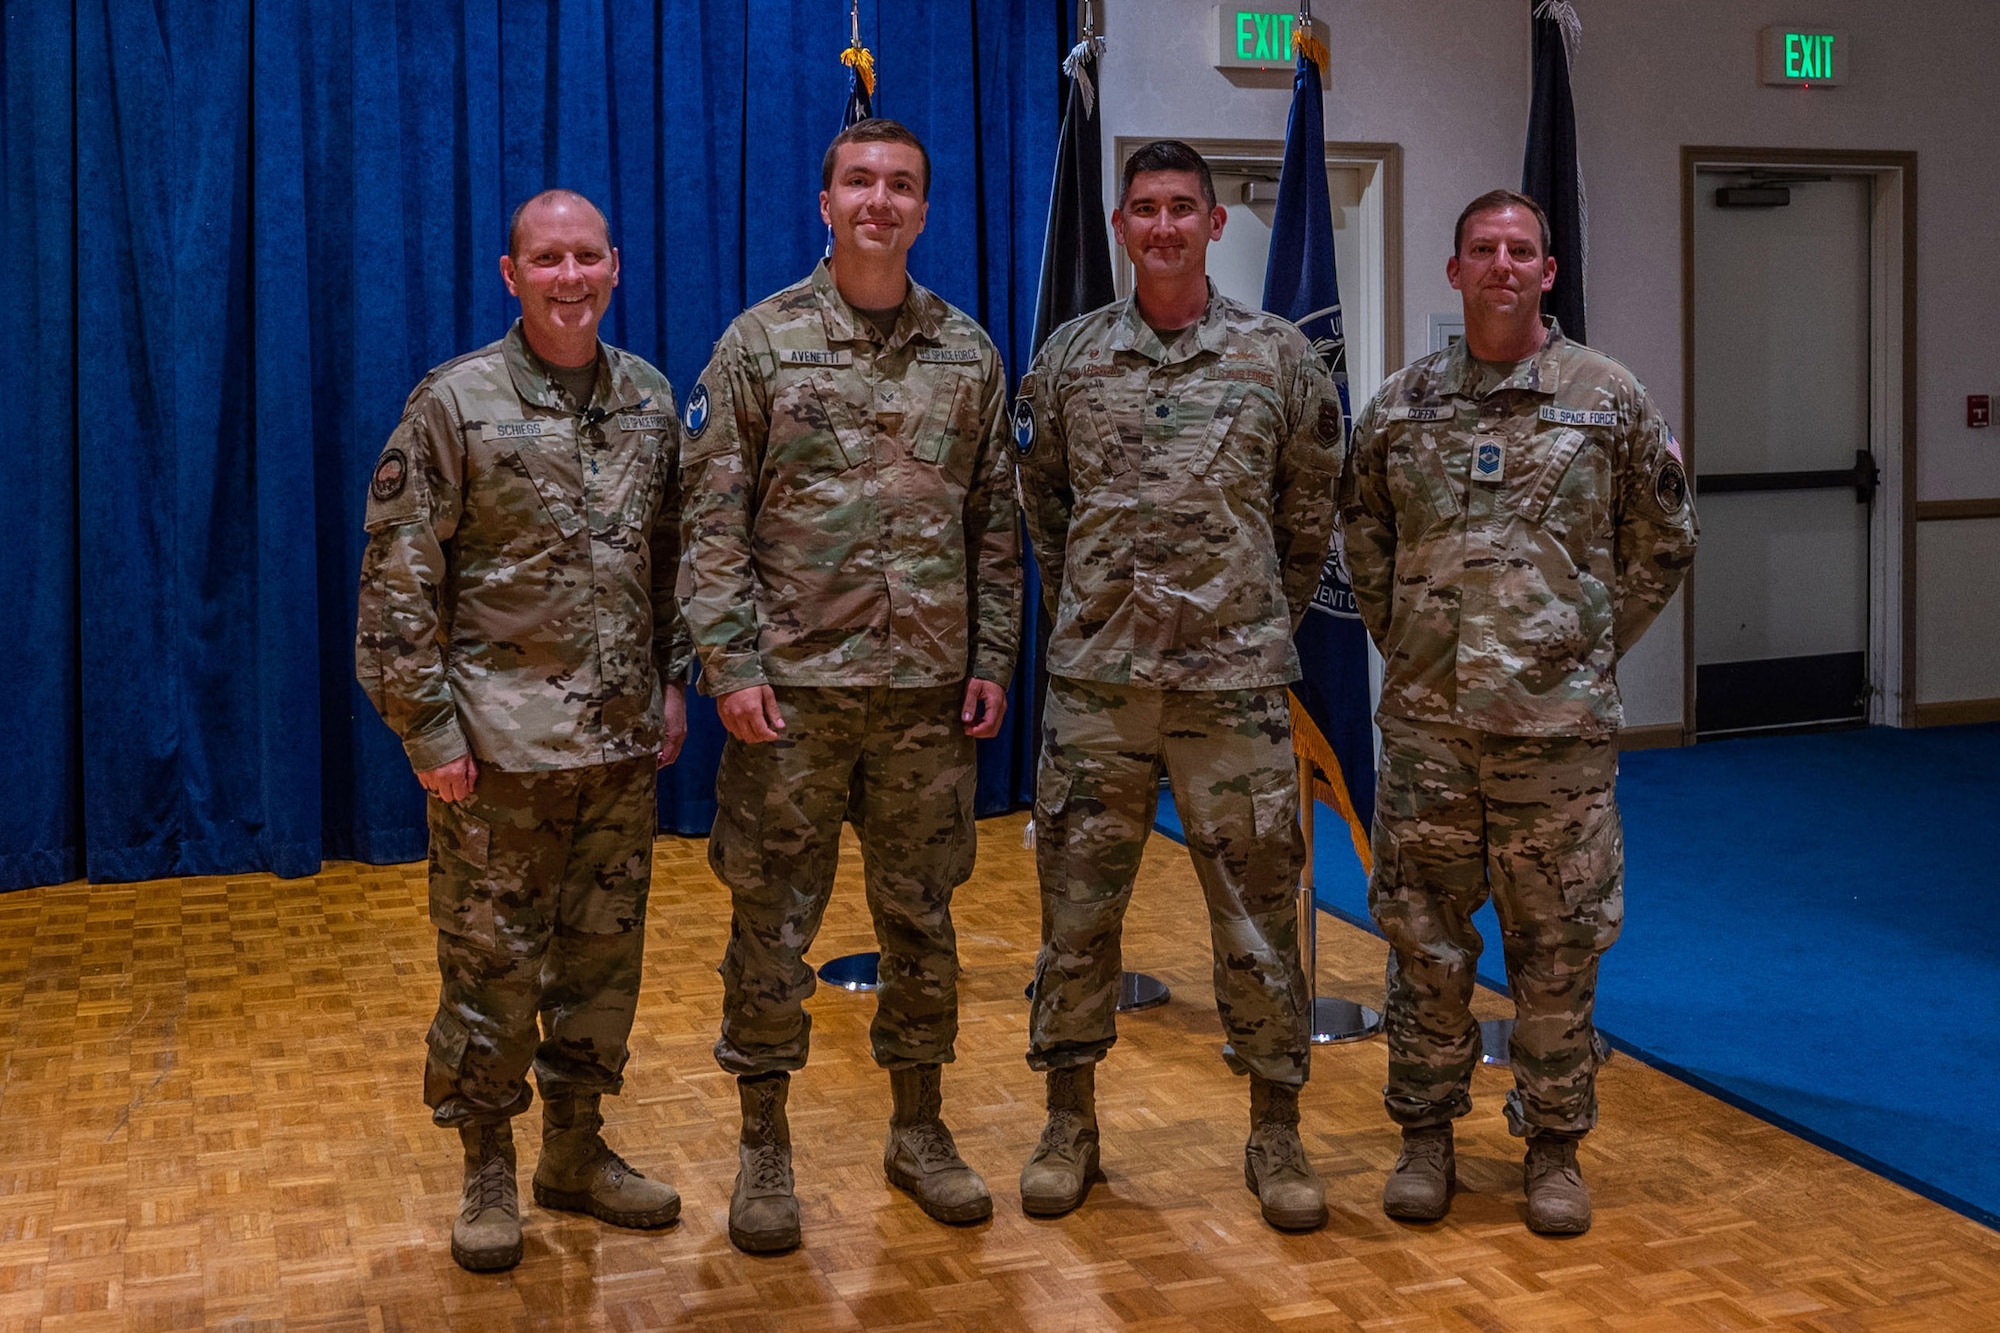 Spec 4. Derek Avenetti, 65th Cyberspace Squadron (CYS) cyber operator, middle left, stands with Combined Force Space Component Command (CFSCC) and 65 CYS leadership after getting coined at a CFSCC All Call Aug. 30, 2022, at Vandenberg Space Force Base, Calif. Unable to attend the All Call was Spec. 3 Jesse Hayden, also a 65 CYS cyber operator, who also was recognized and awarded a coin for his contributions performing life-saving efforts with Avenetti to a military member during a physical training test Aug. 16, 2022. (U.S. Space Force photo by Tech. Sgt. Luke Kitterman)